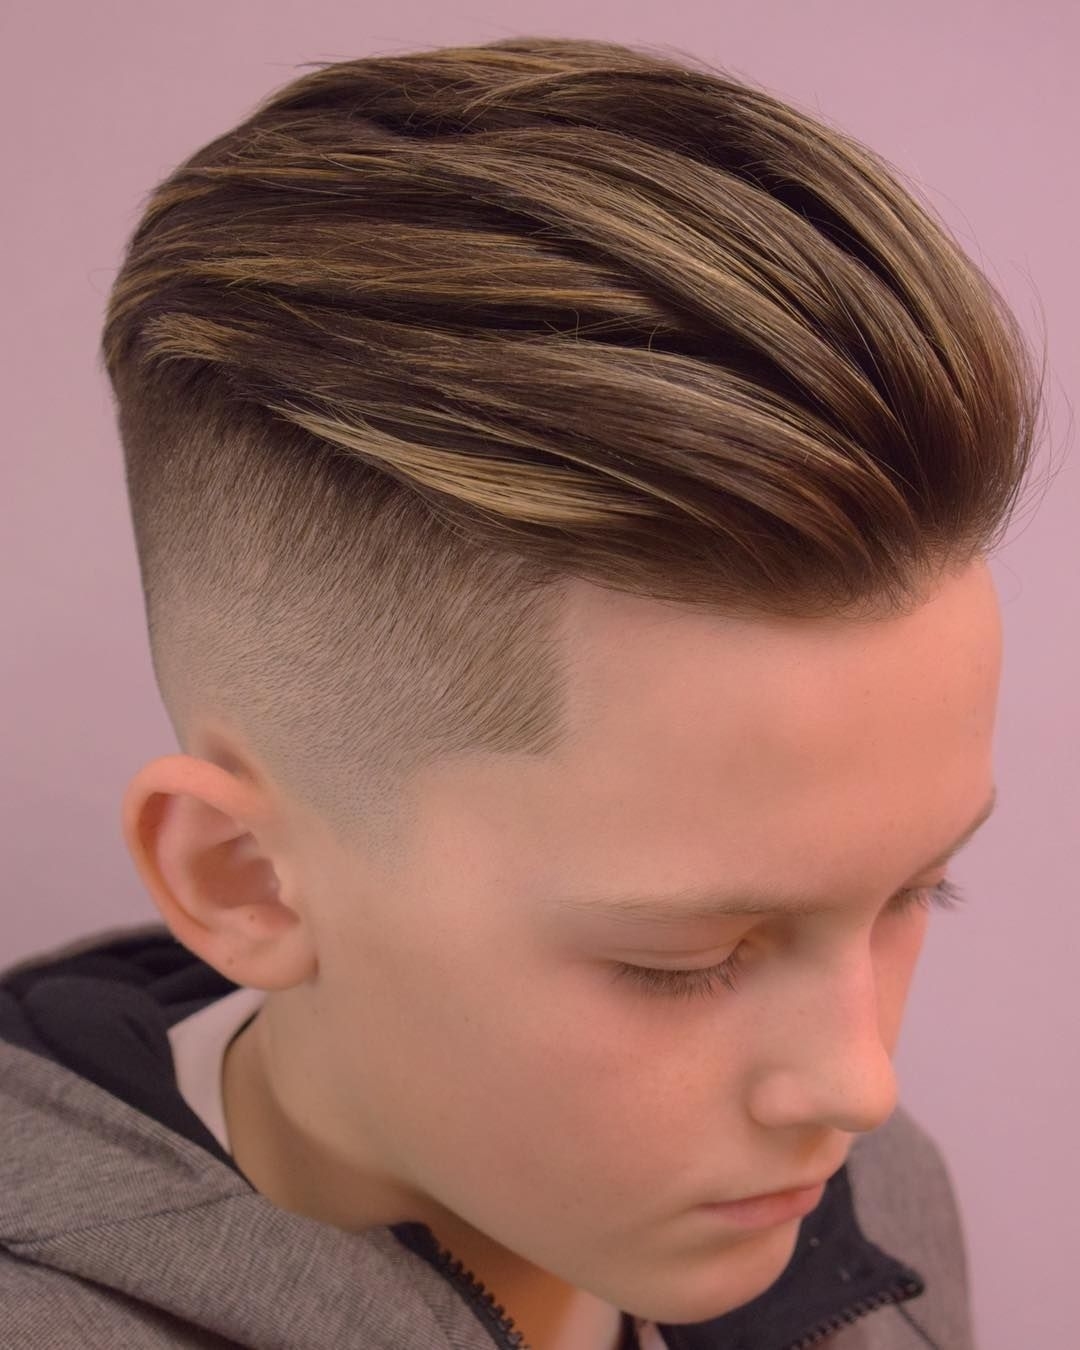 Disconnext Haircut For 13 Uet Olds - Wavy Haircut